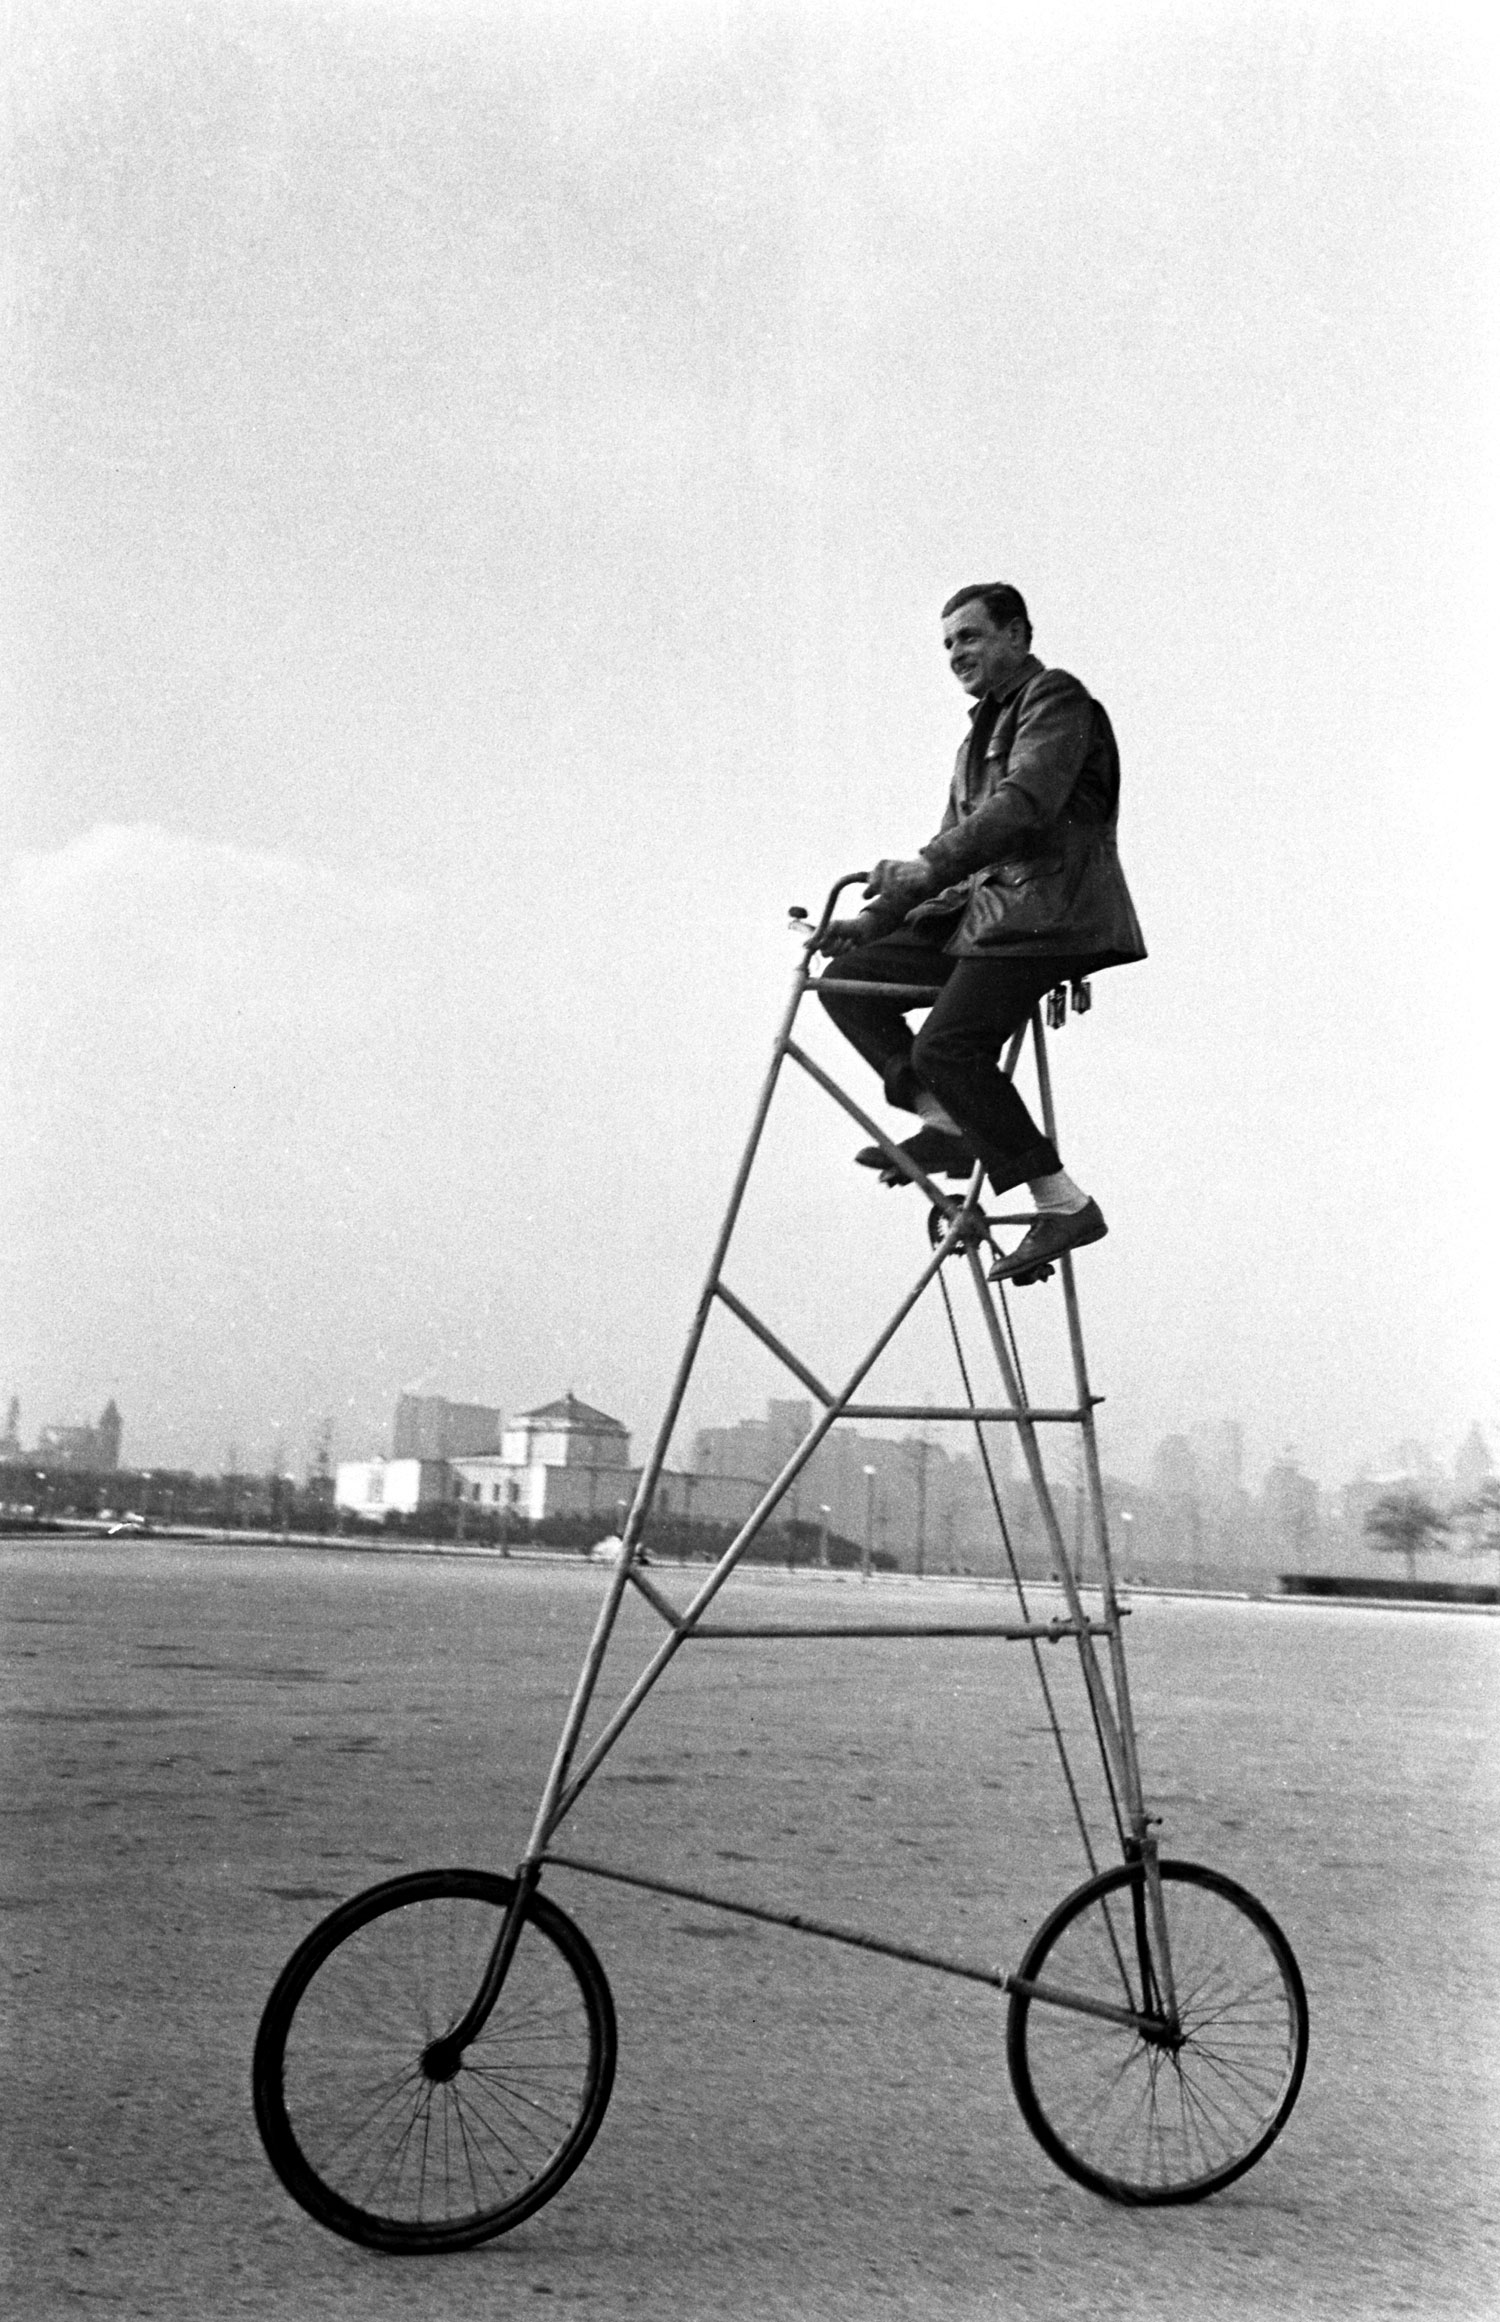 Riding a preposterous bicycle, Chicago, 1948.